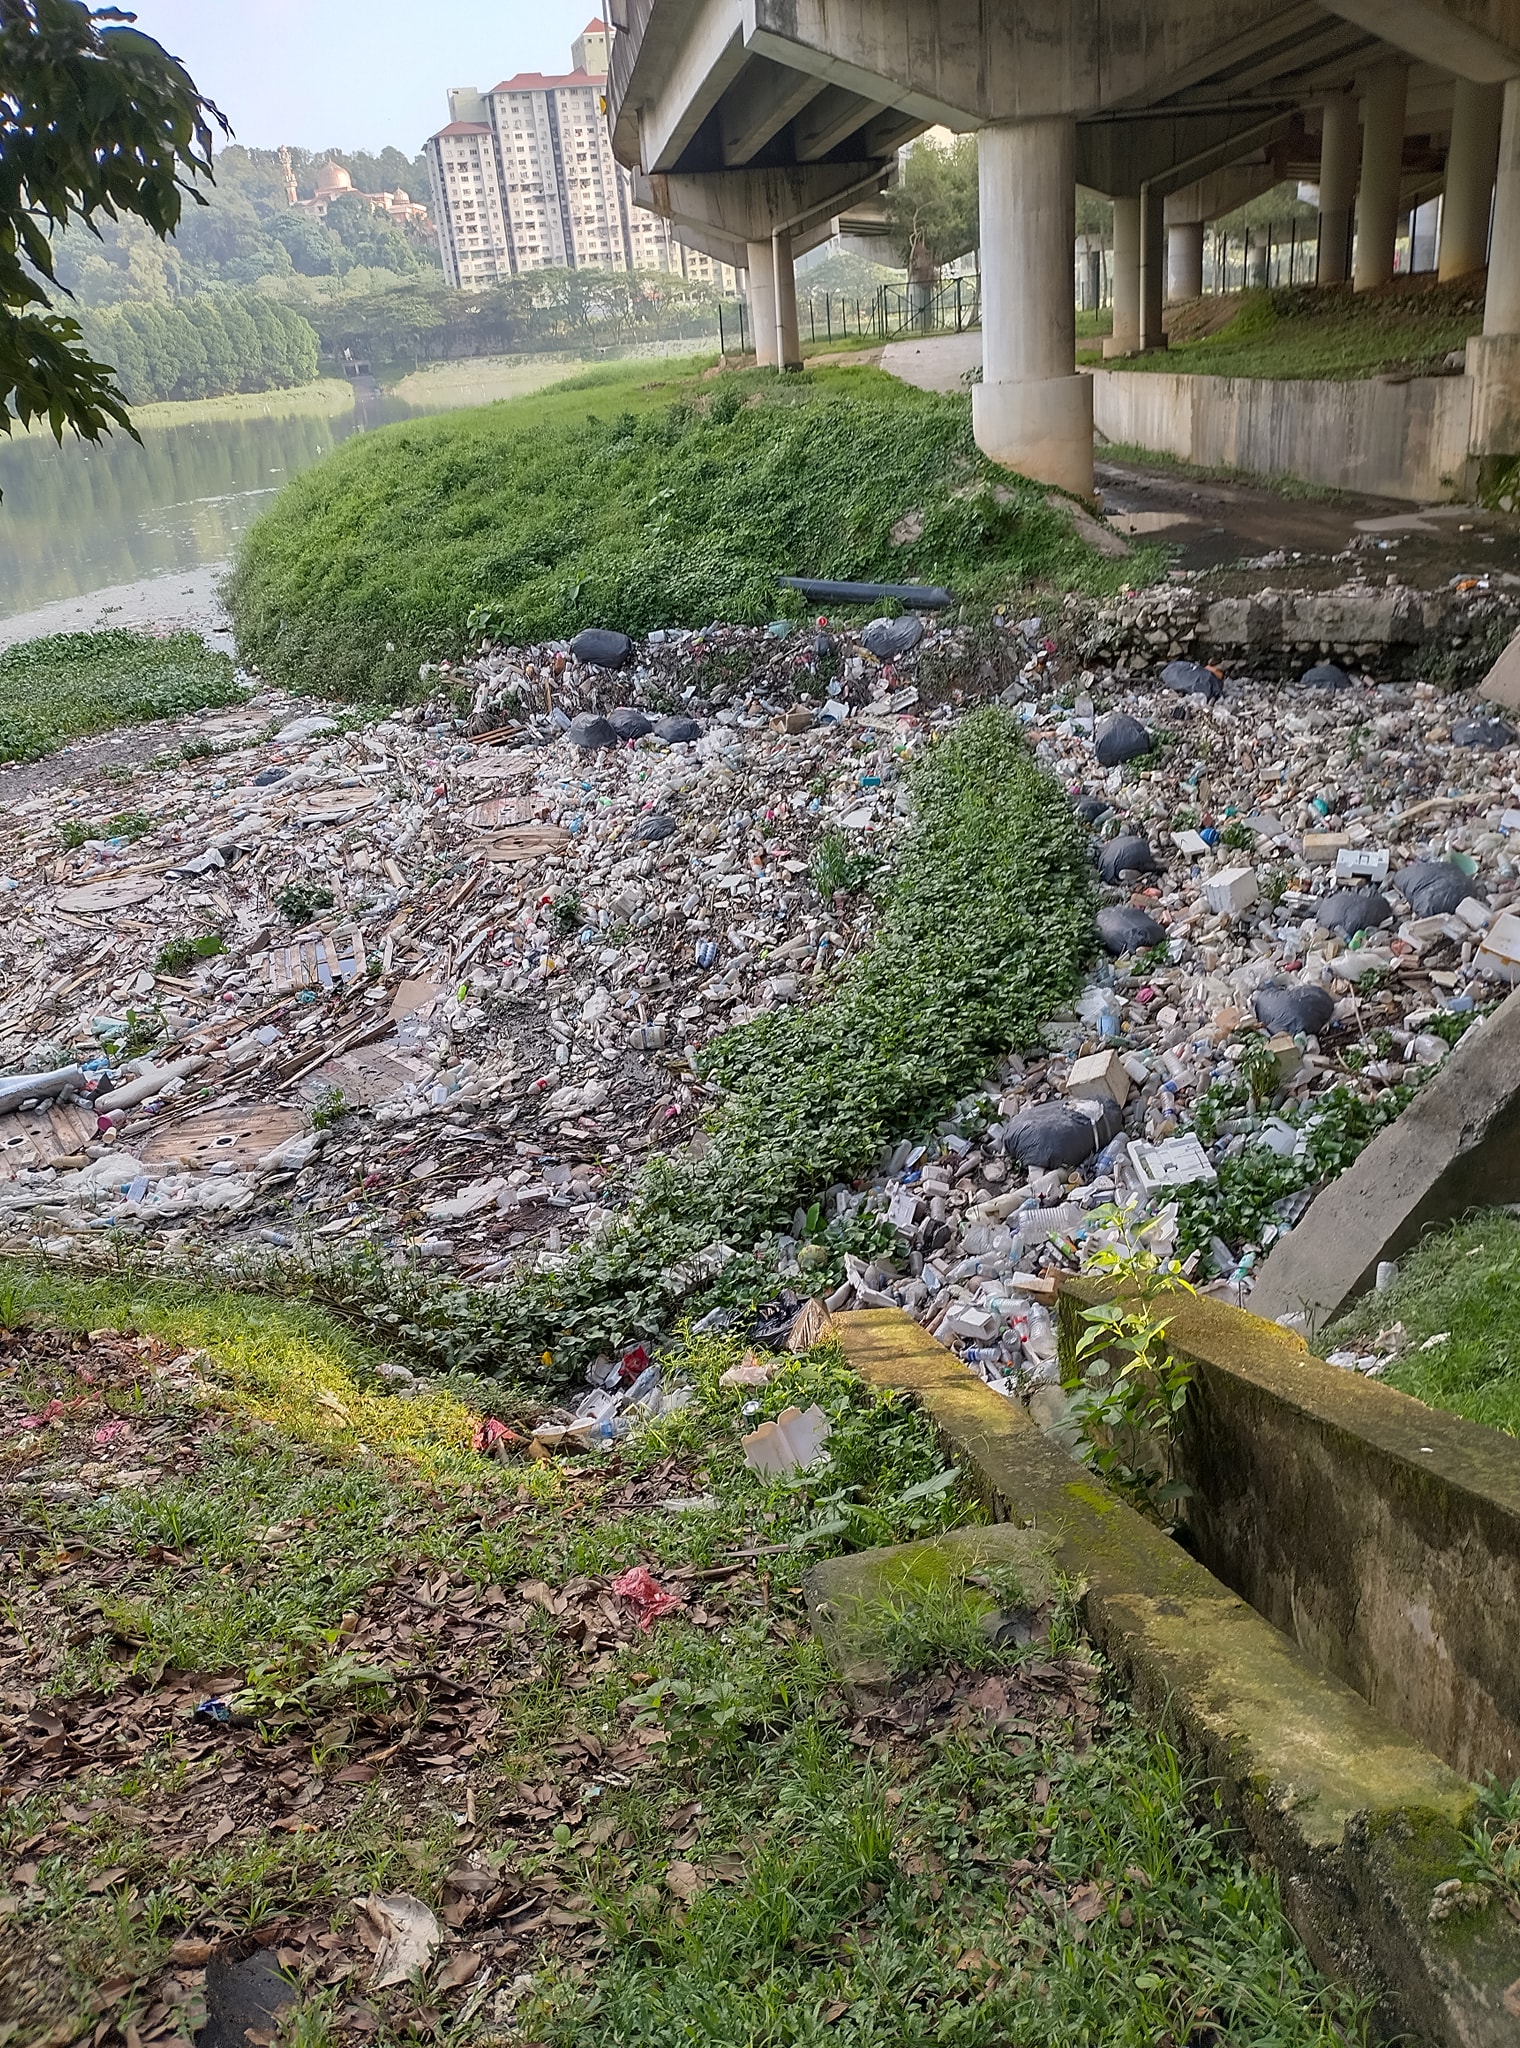 Garbage after flood - commenter photo